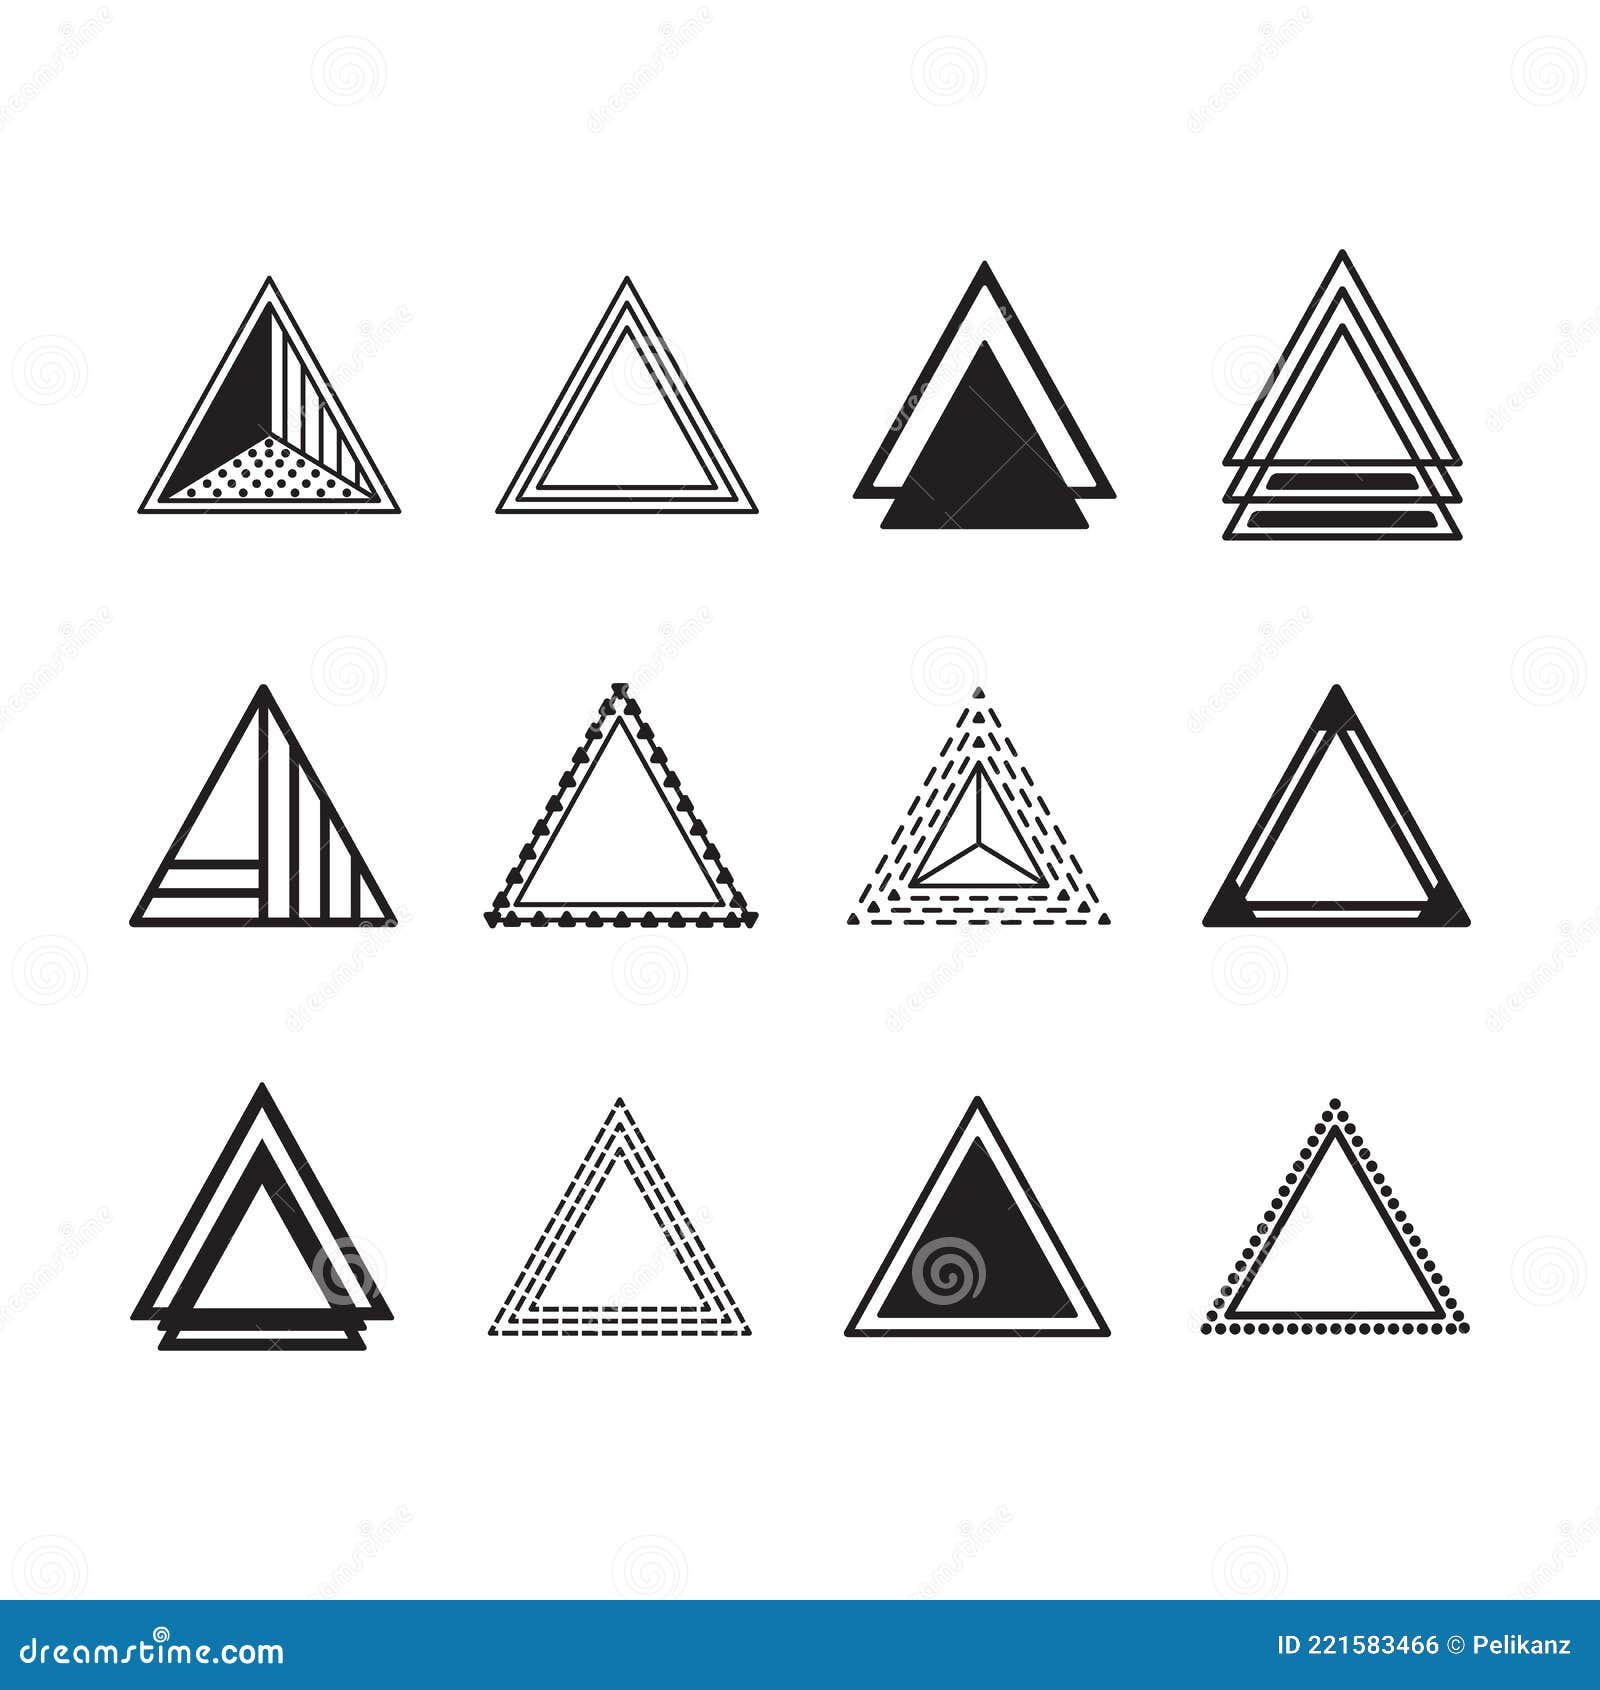 black silhouette and line equilateral triangles motifs and icons set on white